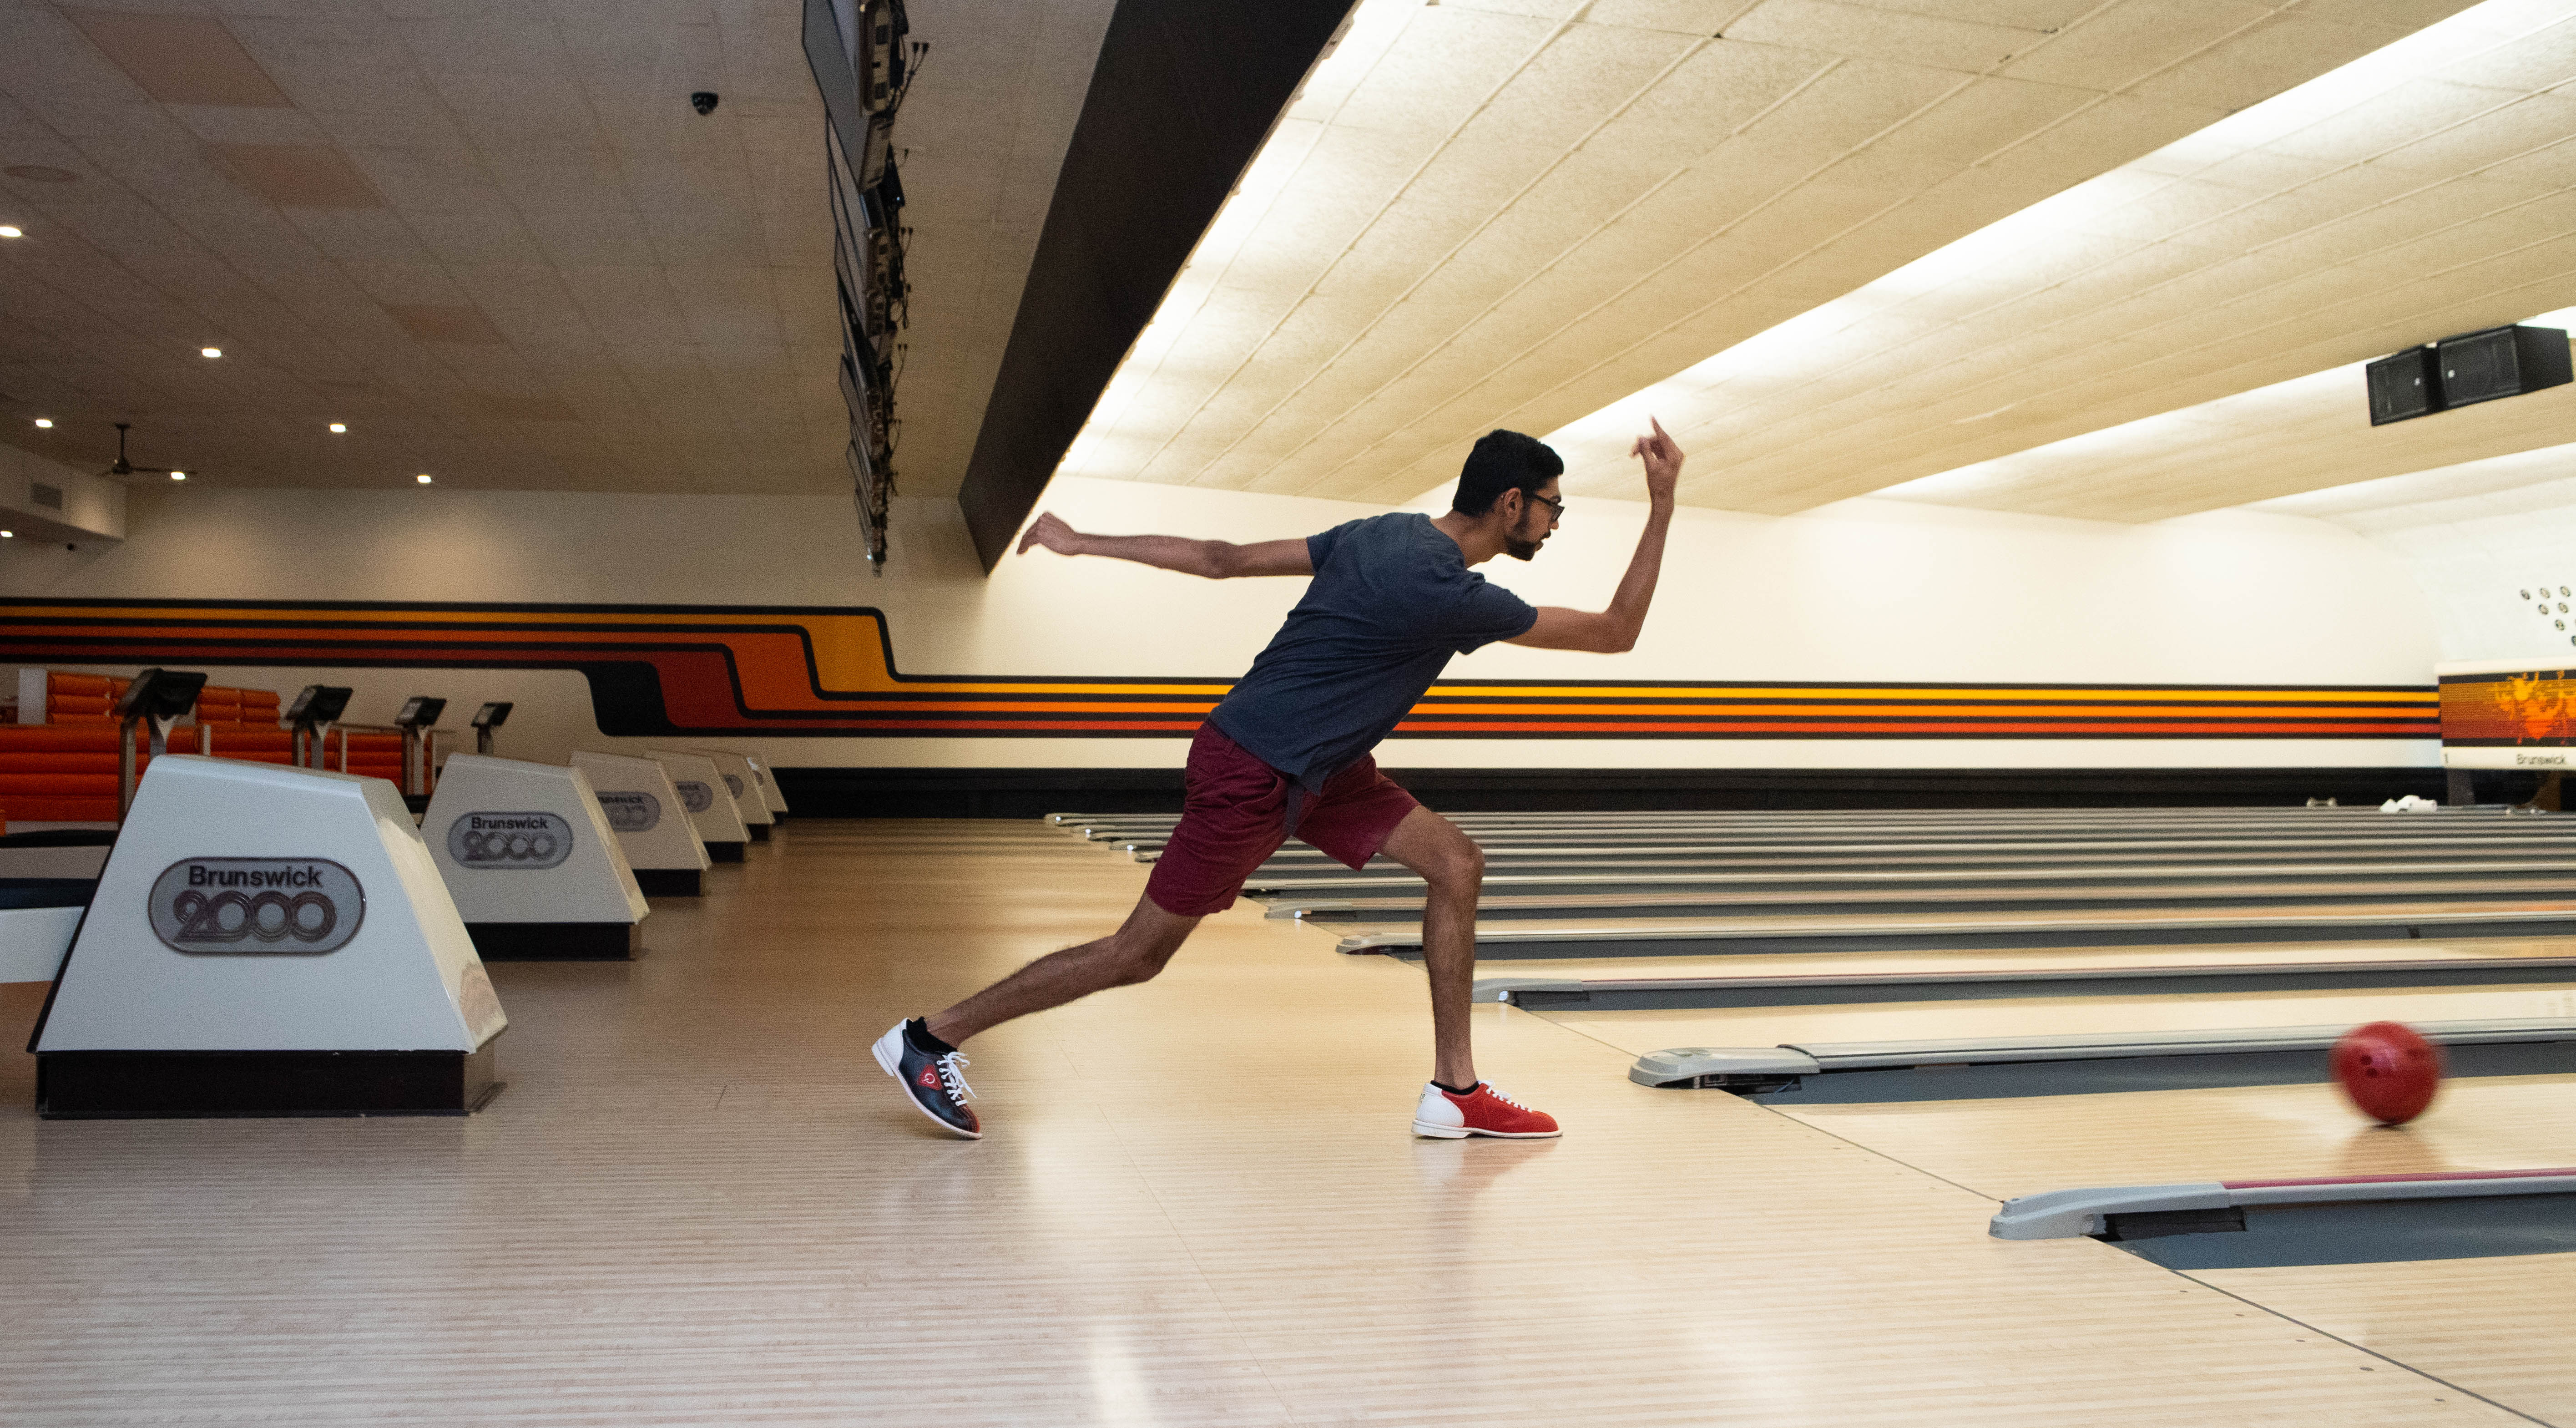 Kush Pateo, 20, of Sterling Heights bowls a frame with friends at Bowlero Lanes & Lounge in Royal Oak.